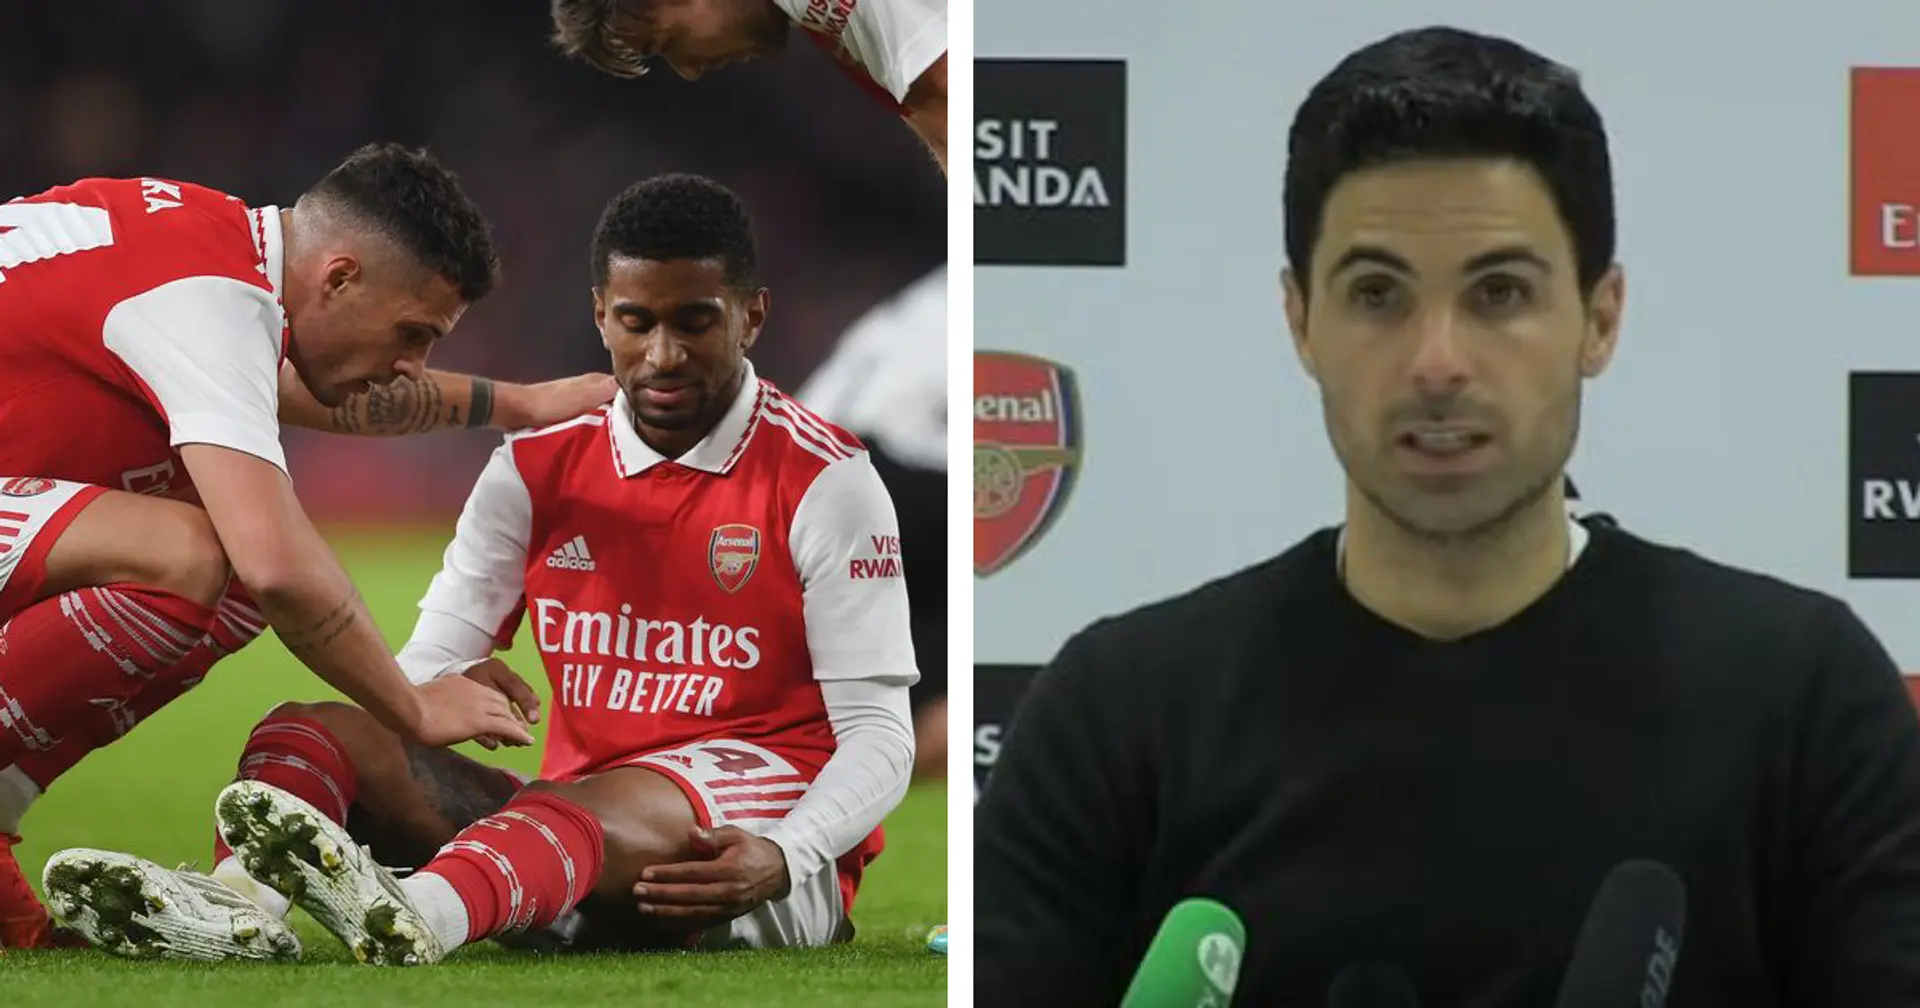 'That hasn't changed the plans': Mikel Arteta calls for calm after Reiss Nelson's injury